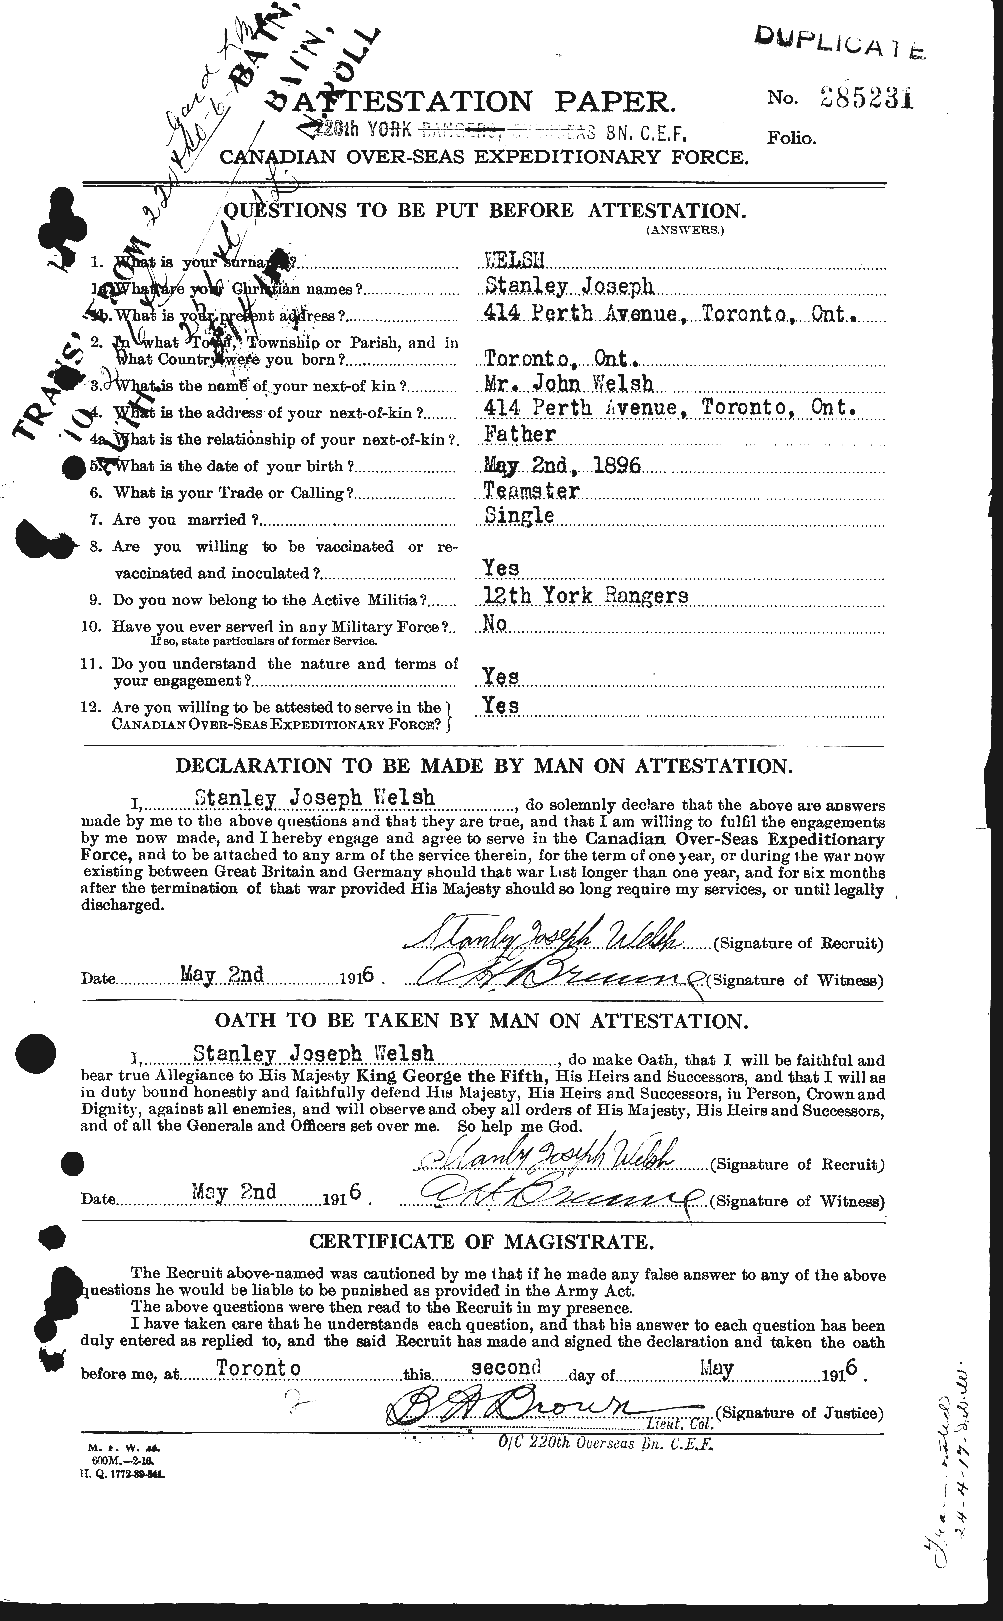 Personnel Records of the First World War - CEF 667728a